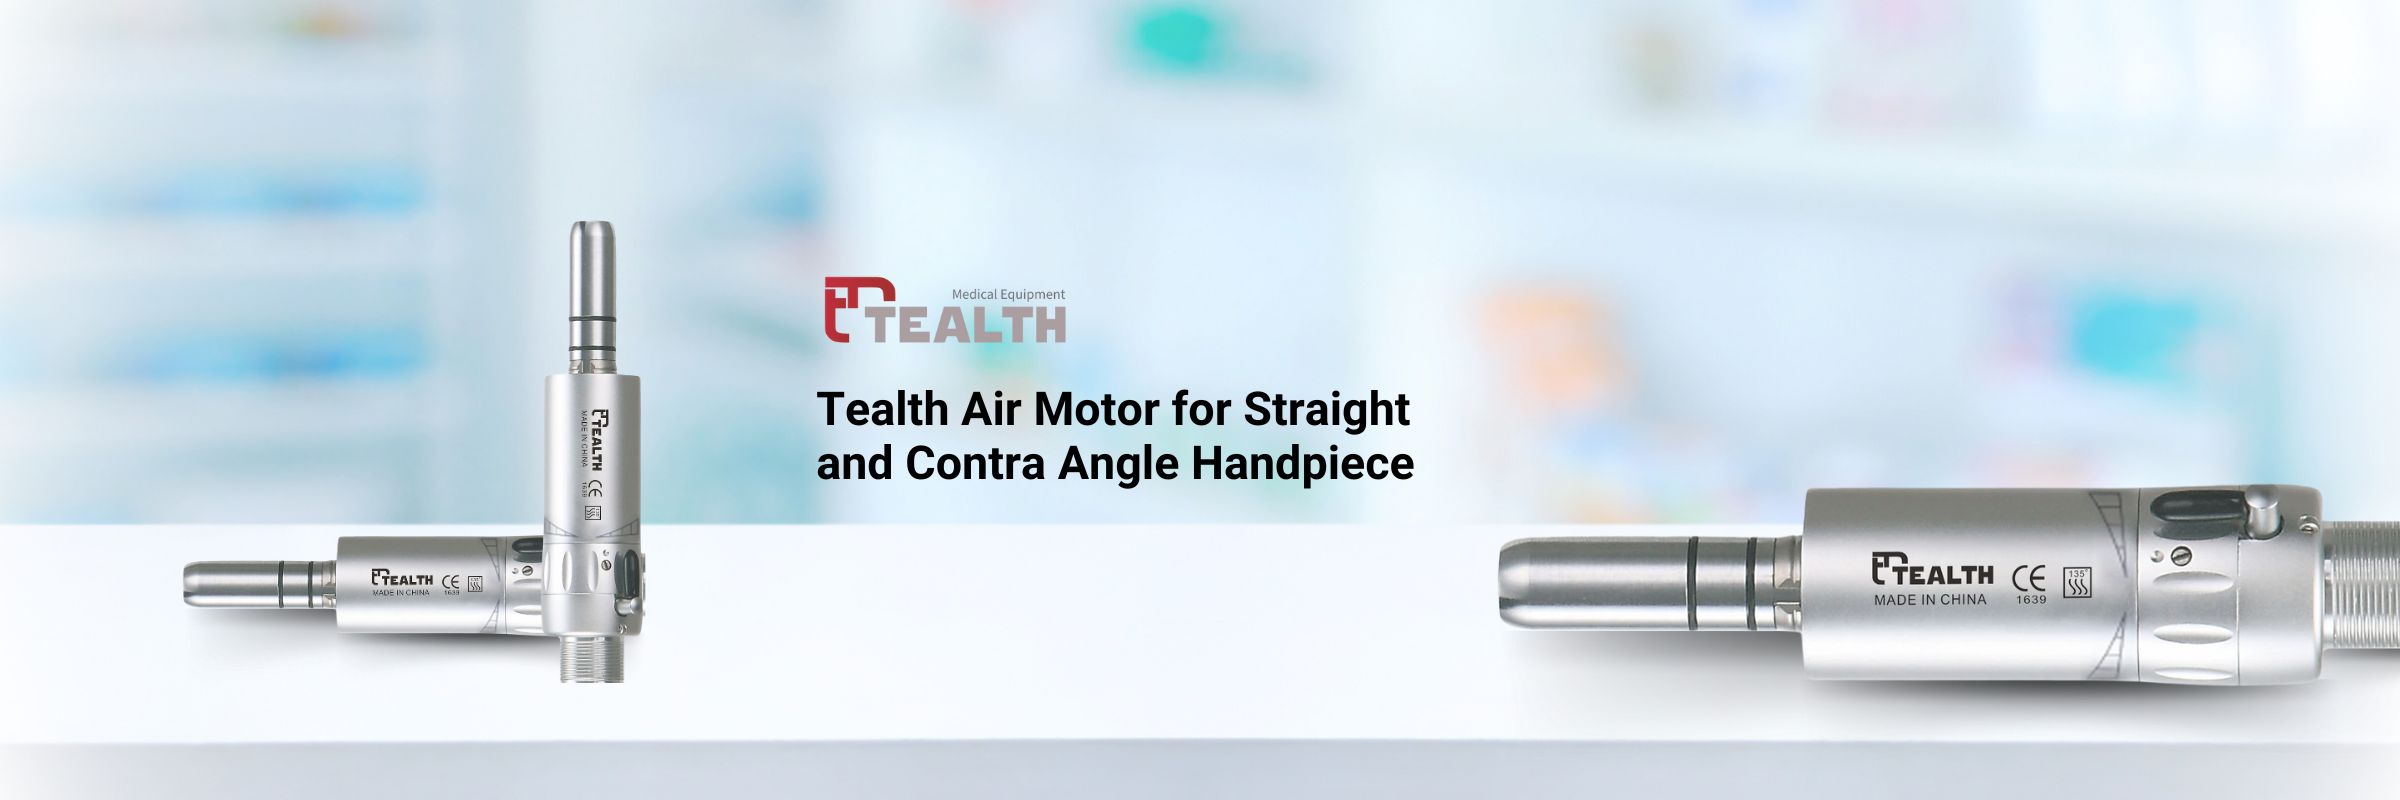 Tealth Air Motor for Straight and Contra Angle Handpiece